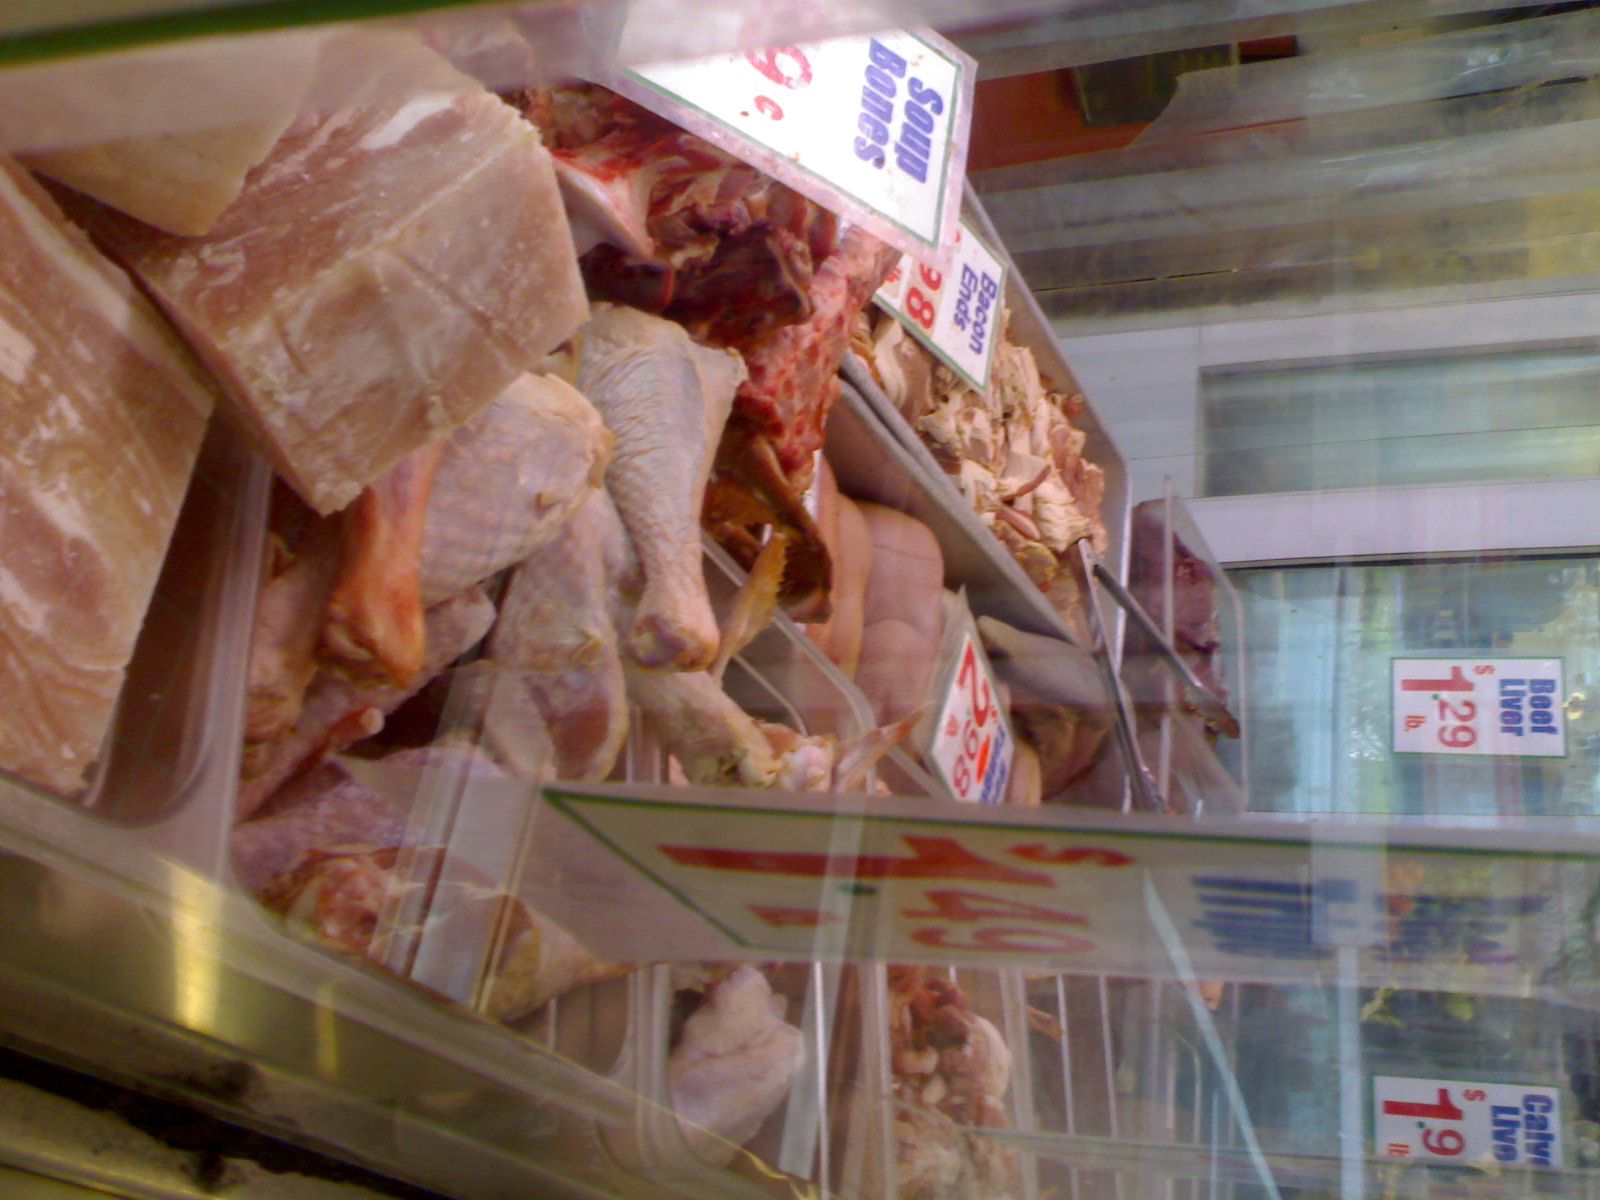 a grocery store filled with packaged meats and meat on display